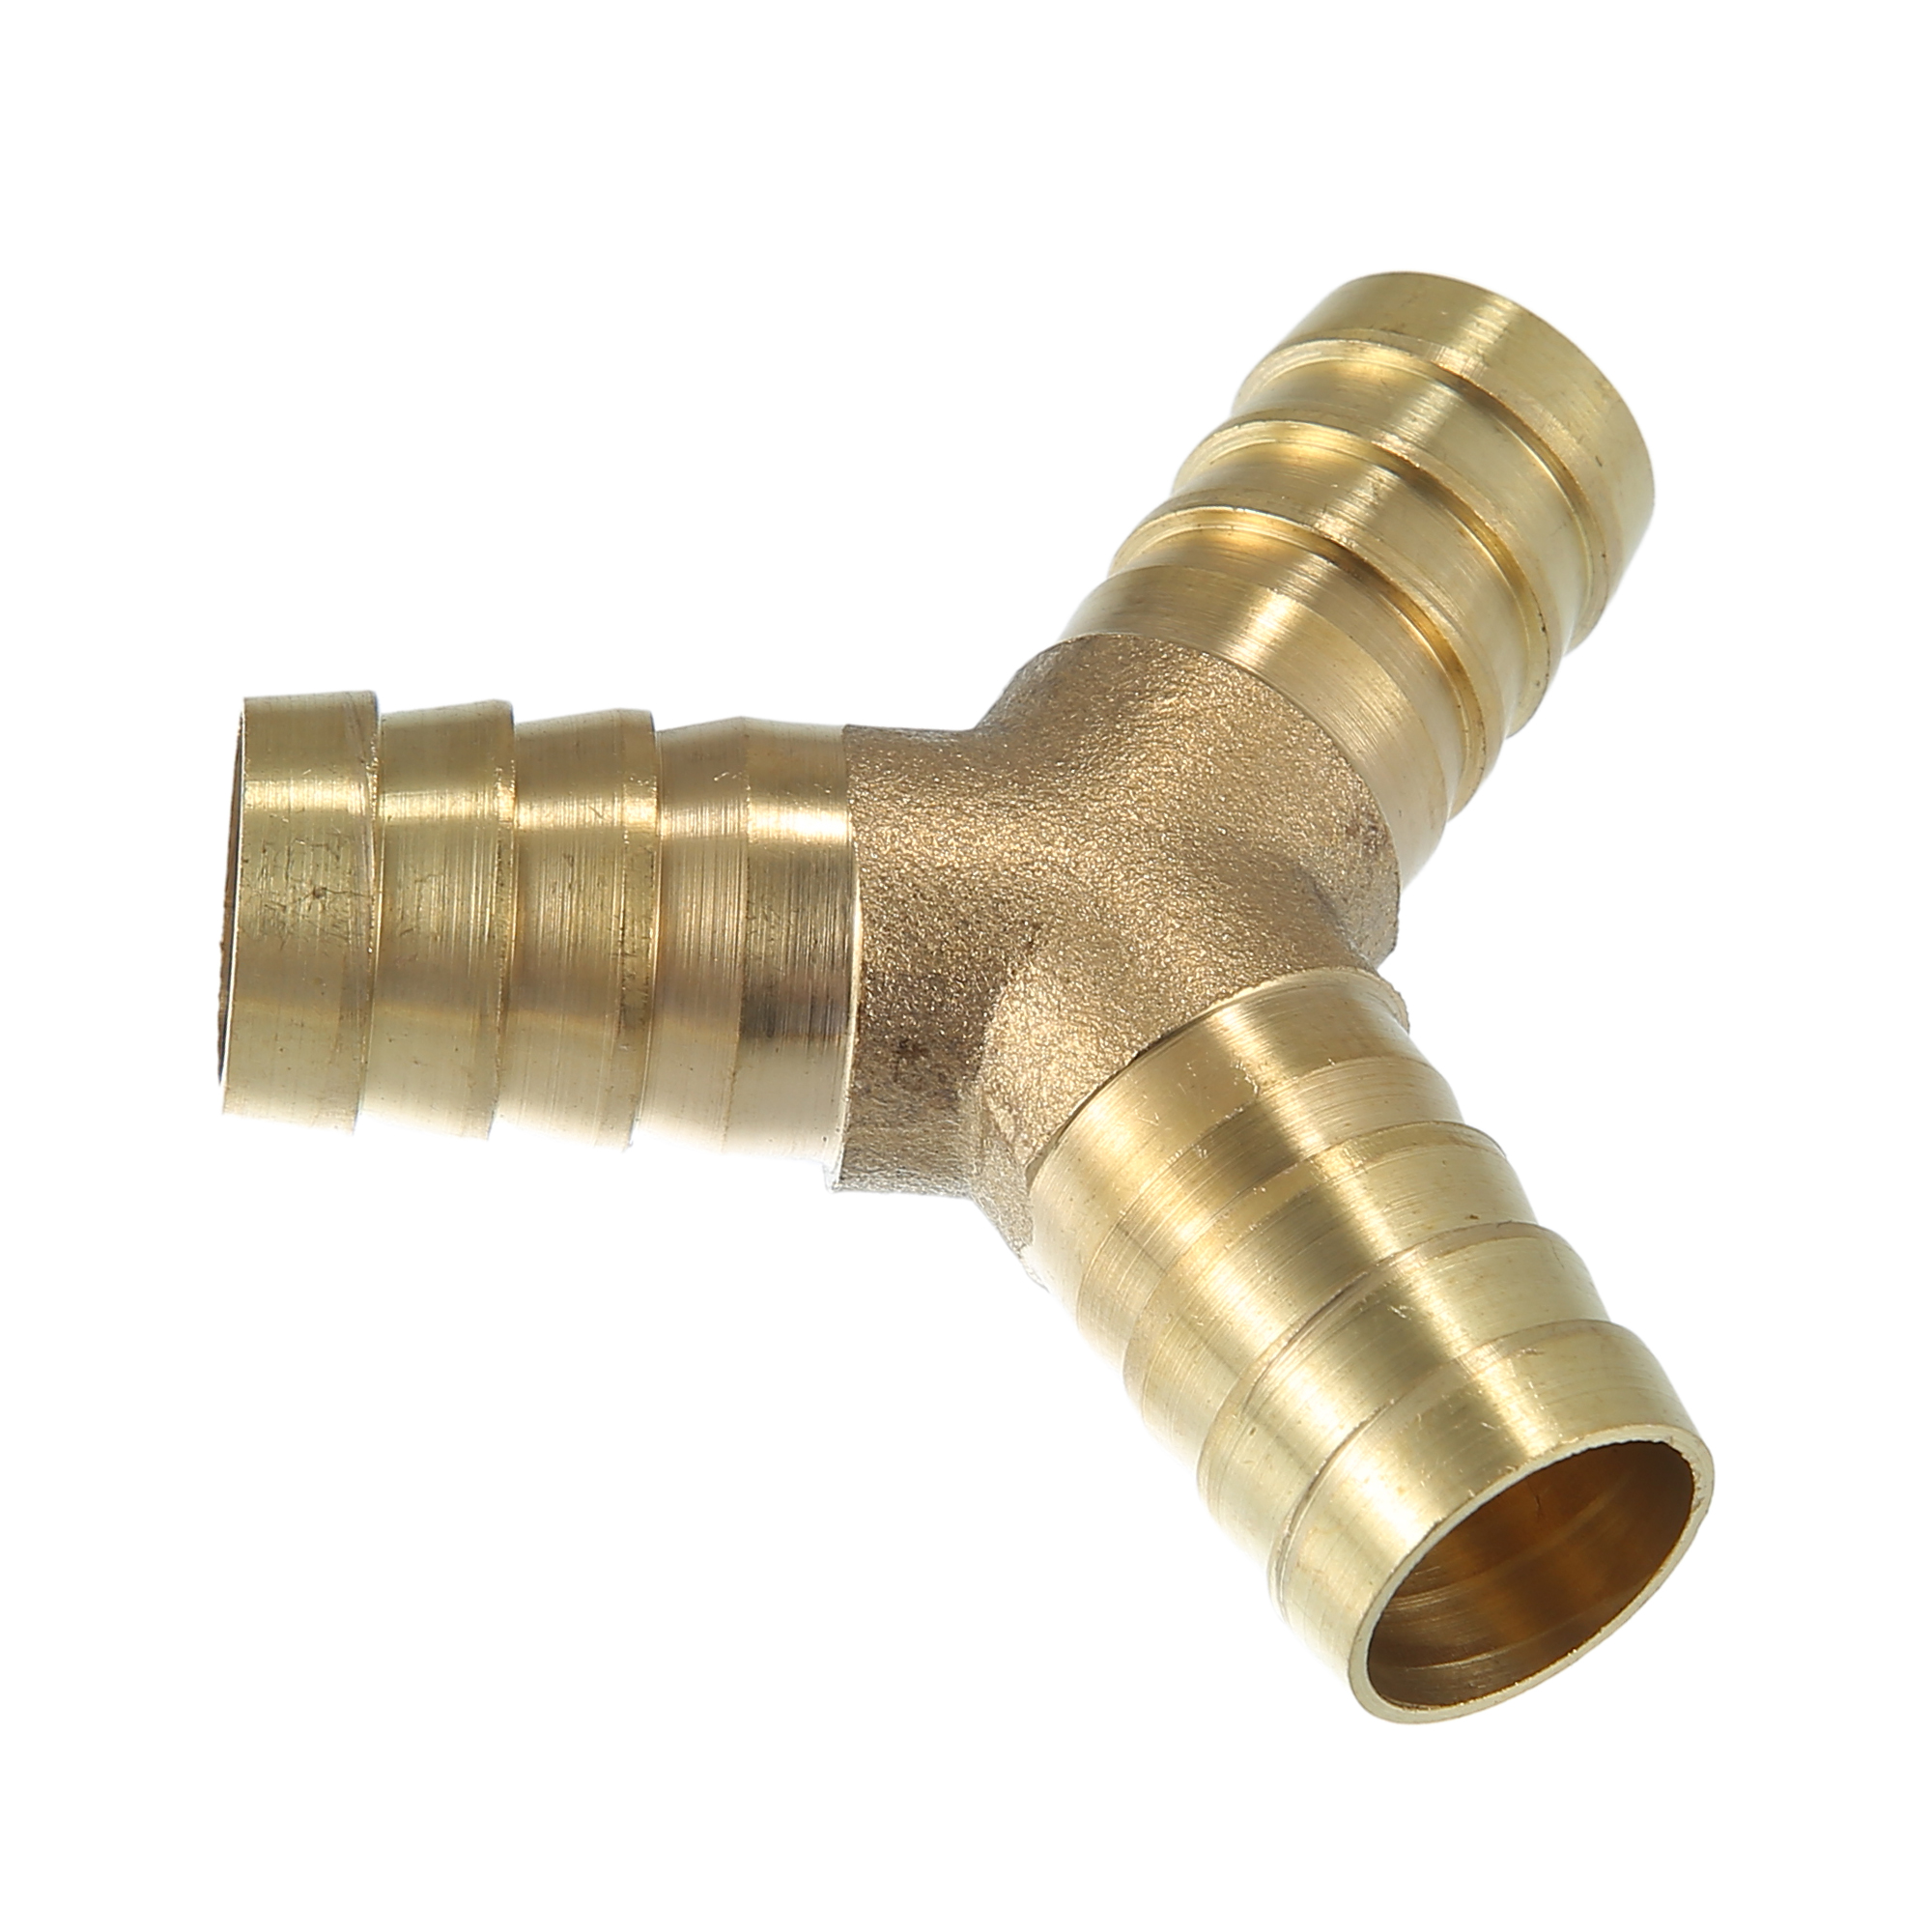 Unique Bargains 3 Pcs 14mm Brass Car Barb Hose Fitting Y Shape 3 Way Connector for Air Water